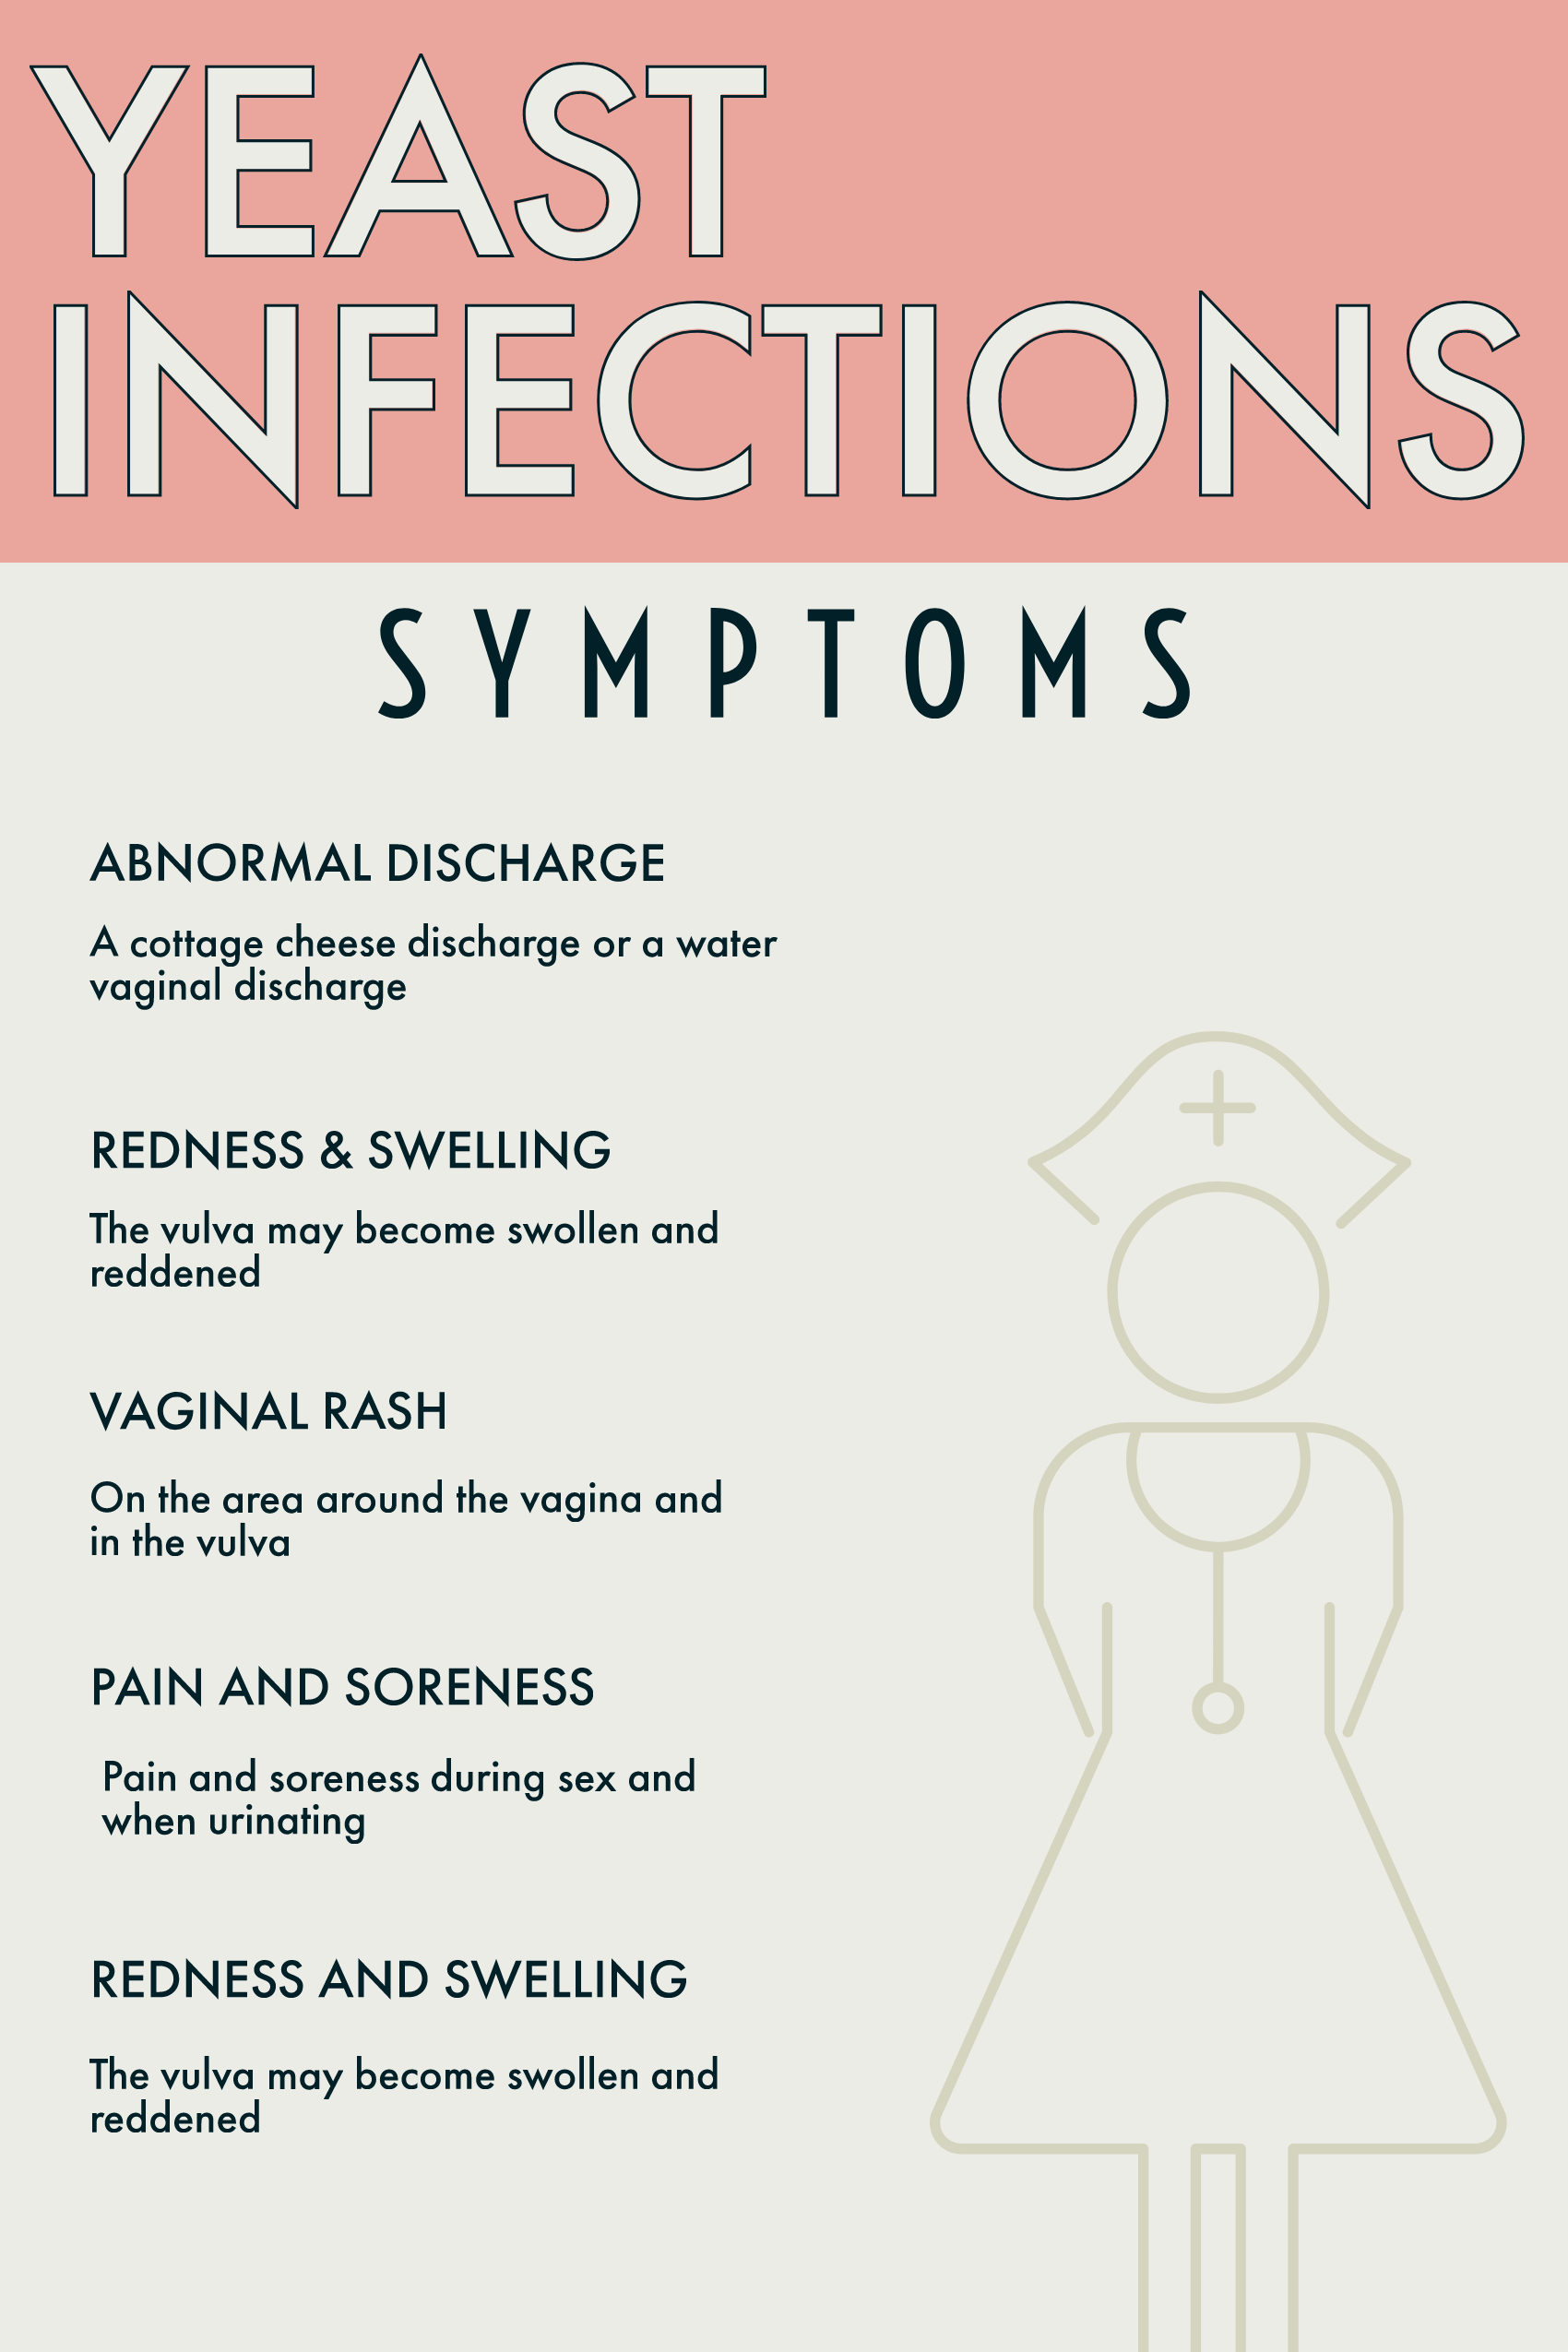 Pin on Yeast Infections